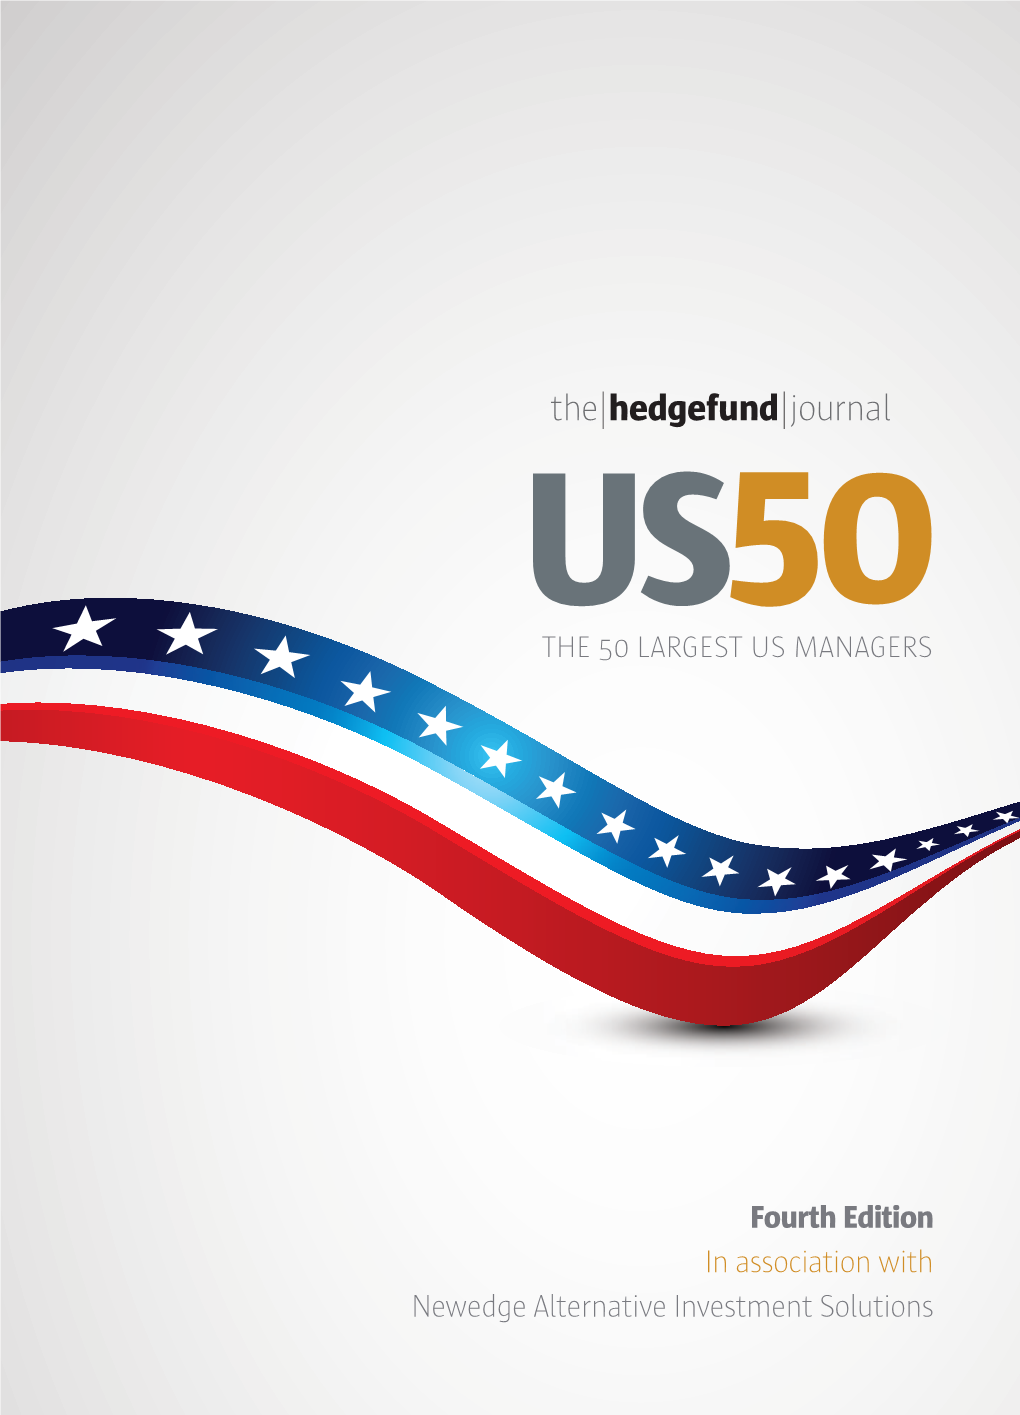 Fourth Edition in Association with Newedge Alternative Investment Solutions US50 in ASSOCIATION WITH